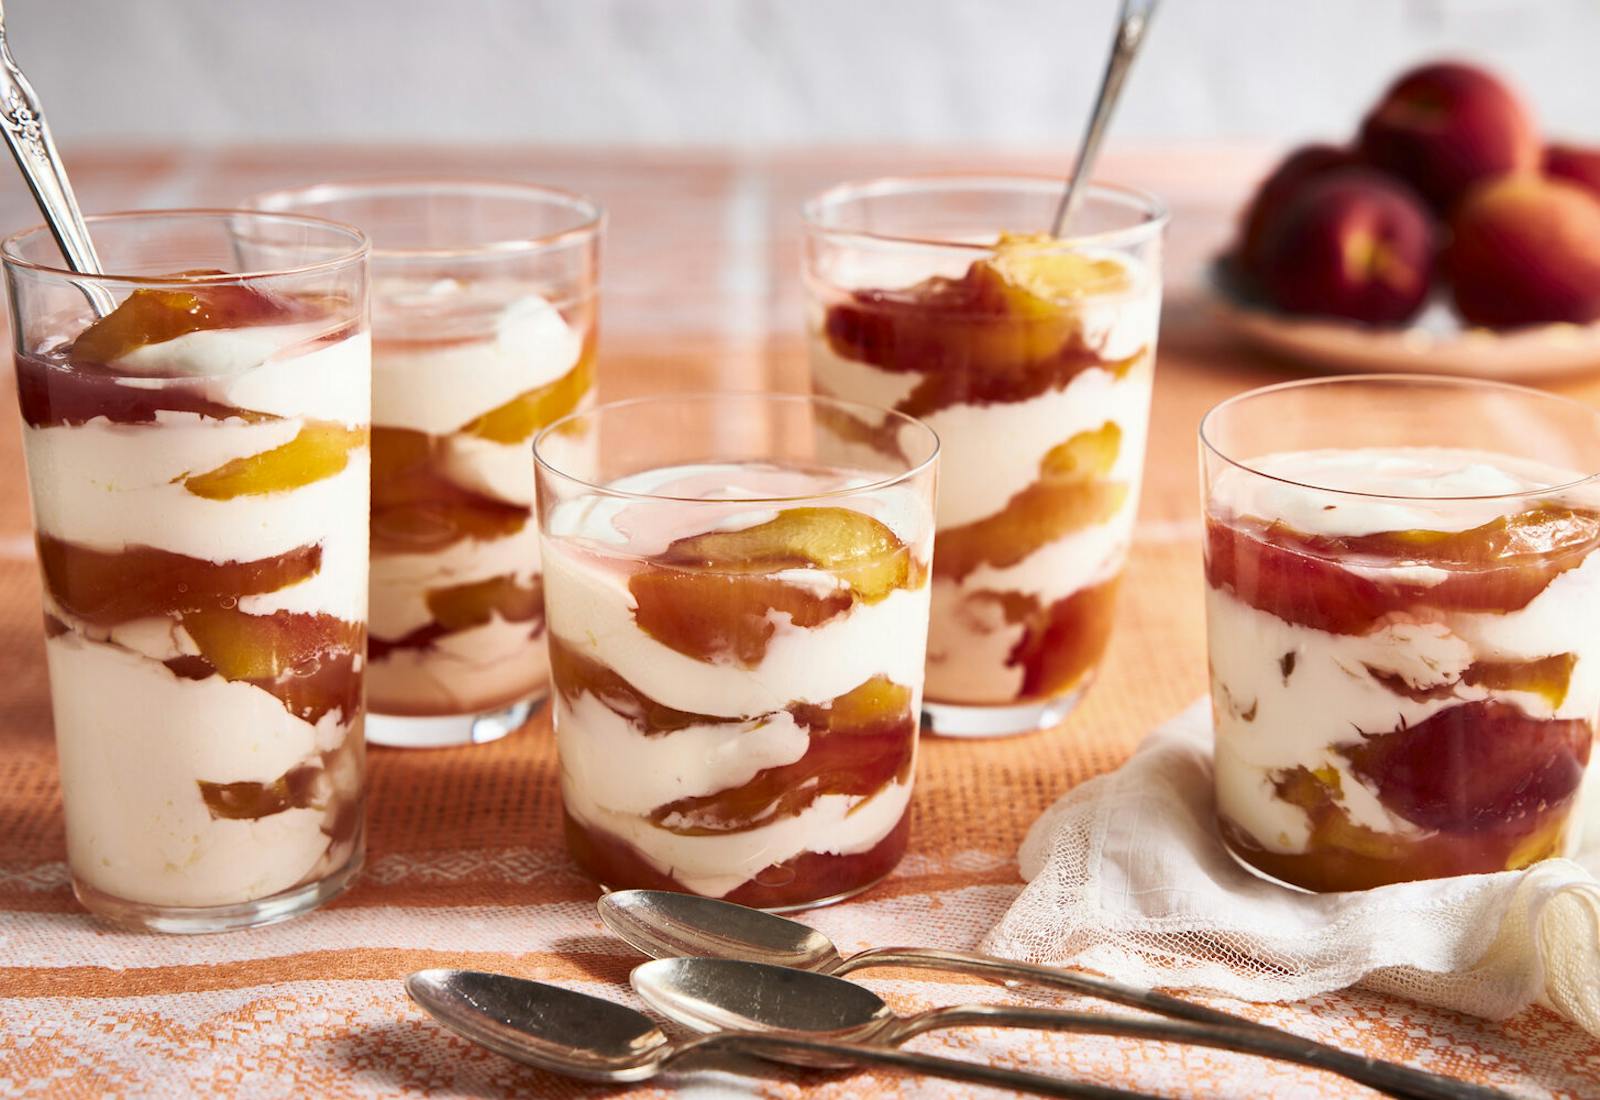 Parfait cups with layers of peaches and sour cream with bowl of fresh peaches in the background atop orange tablecloth.